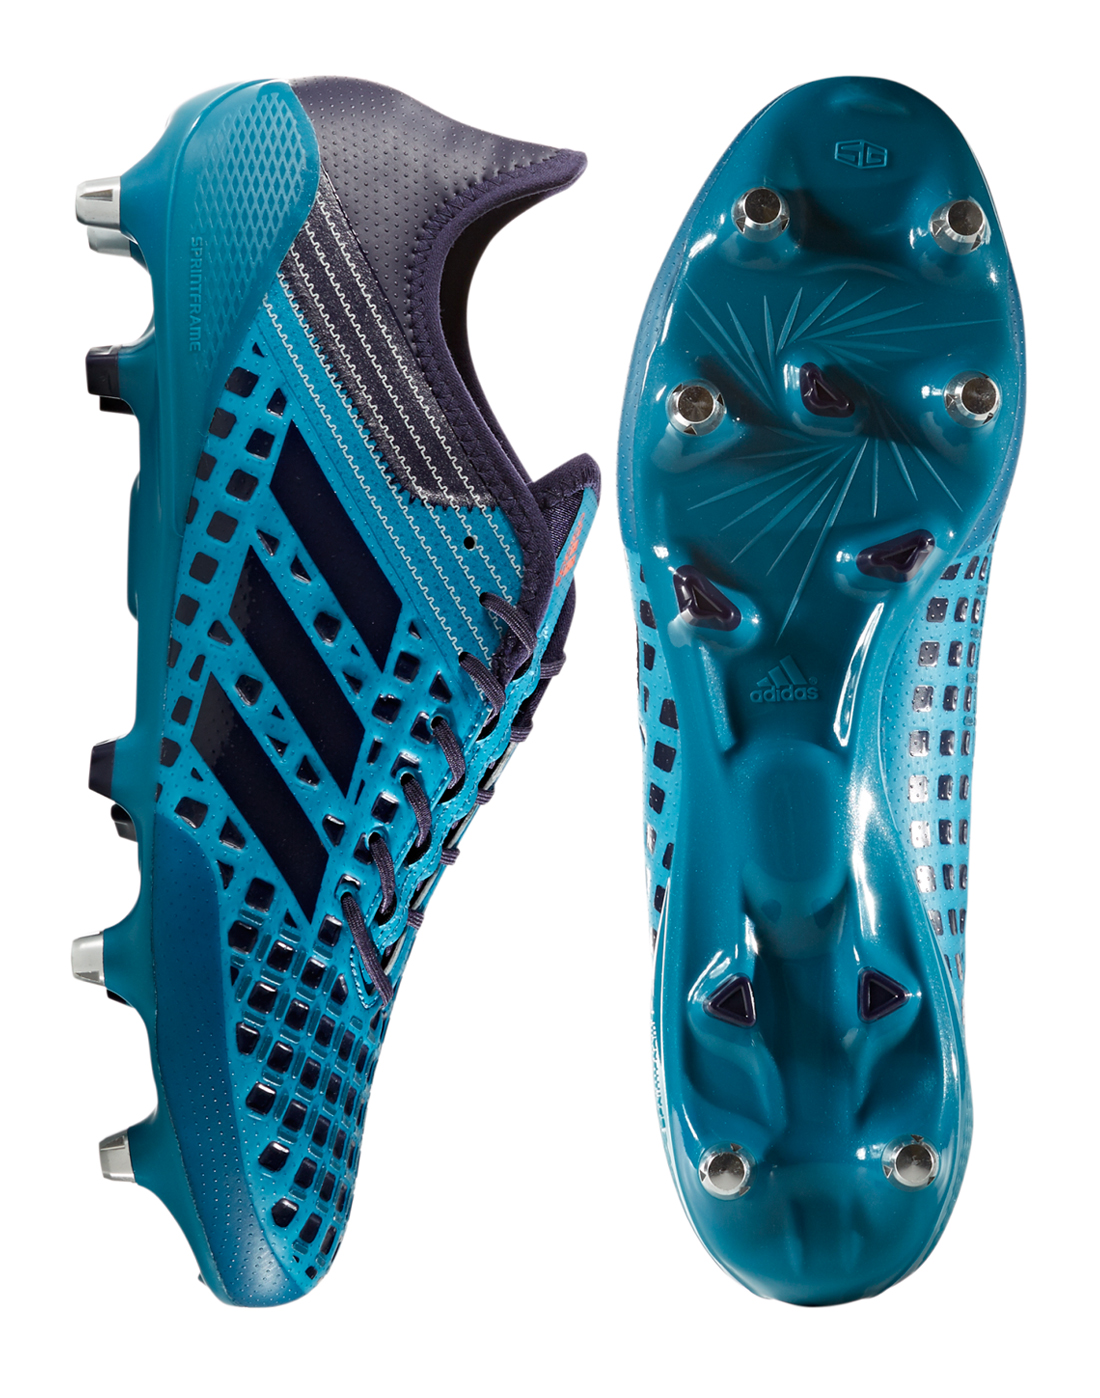 adidas sprintframe rugby boots